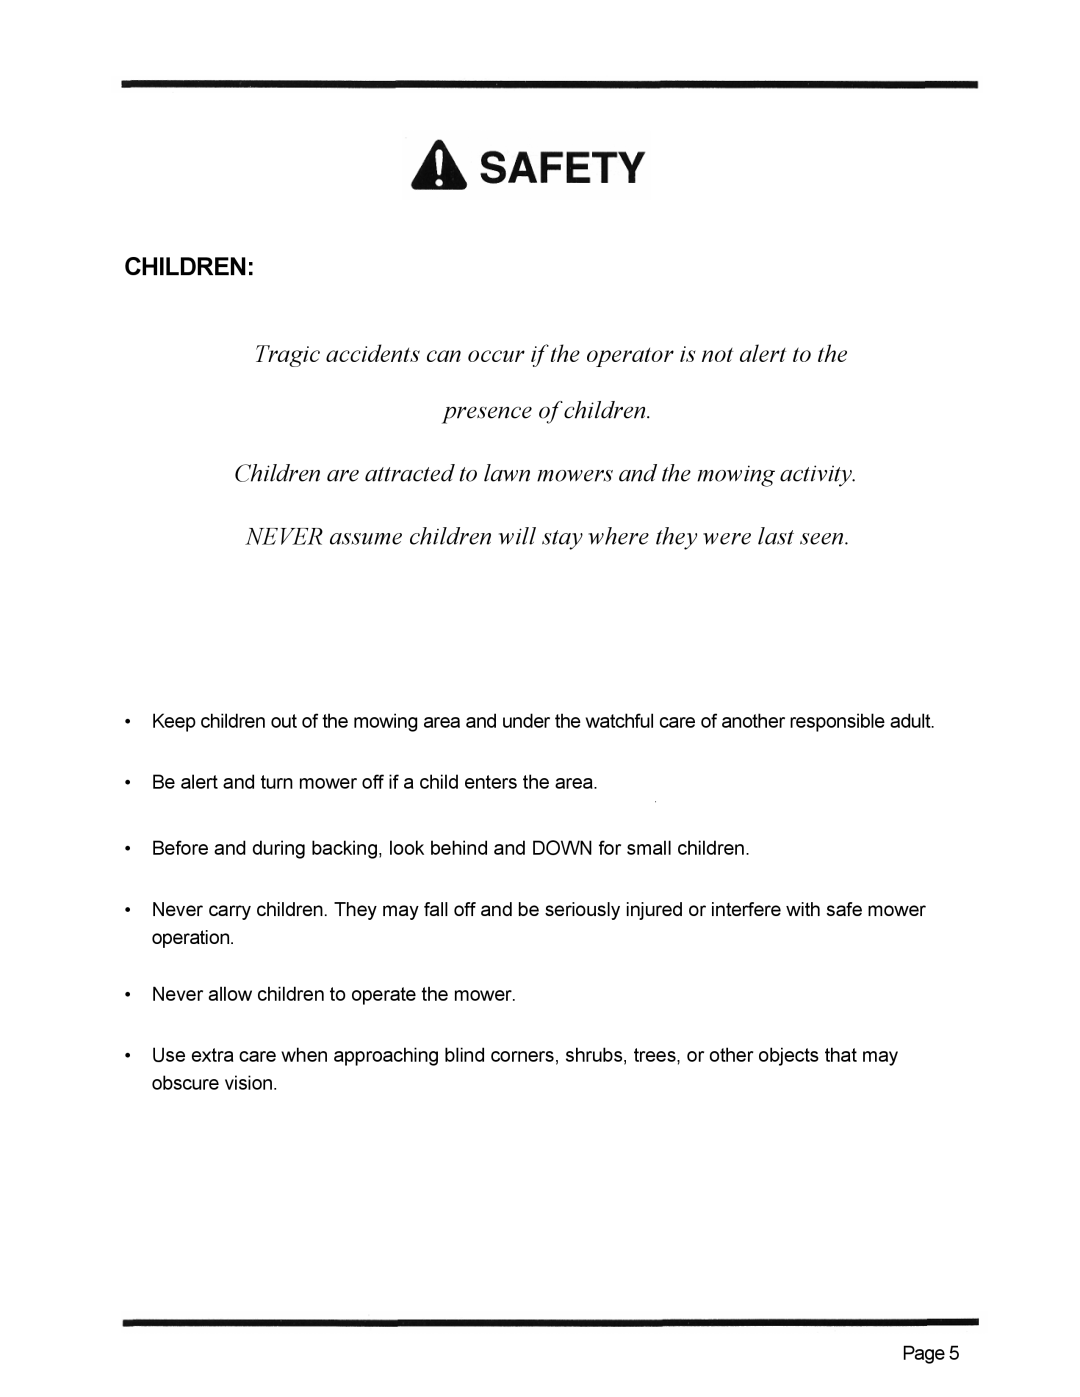 Dixon 4500 Series manual Children, Tragic accidents can occur if the operator is not alert to the, presence of children 